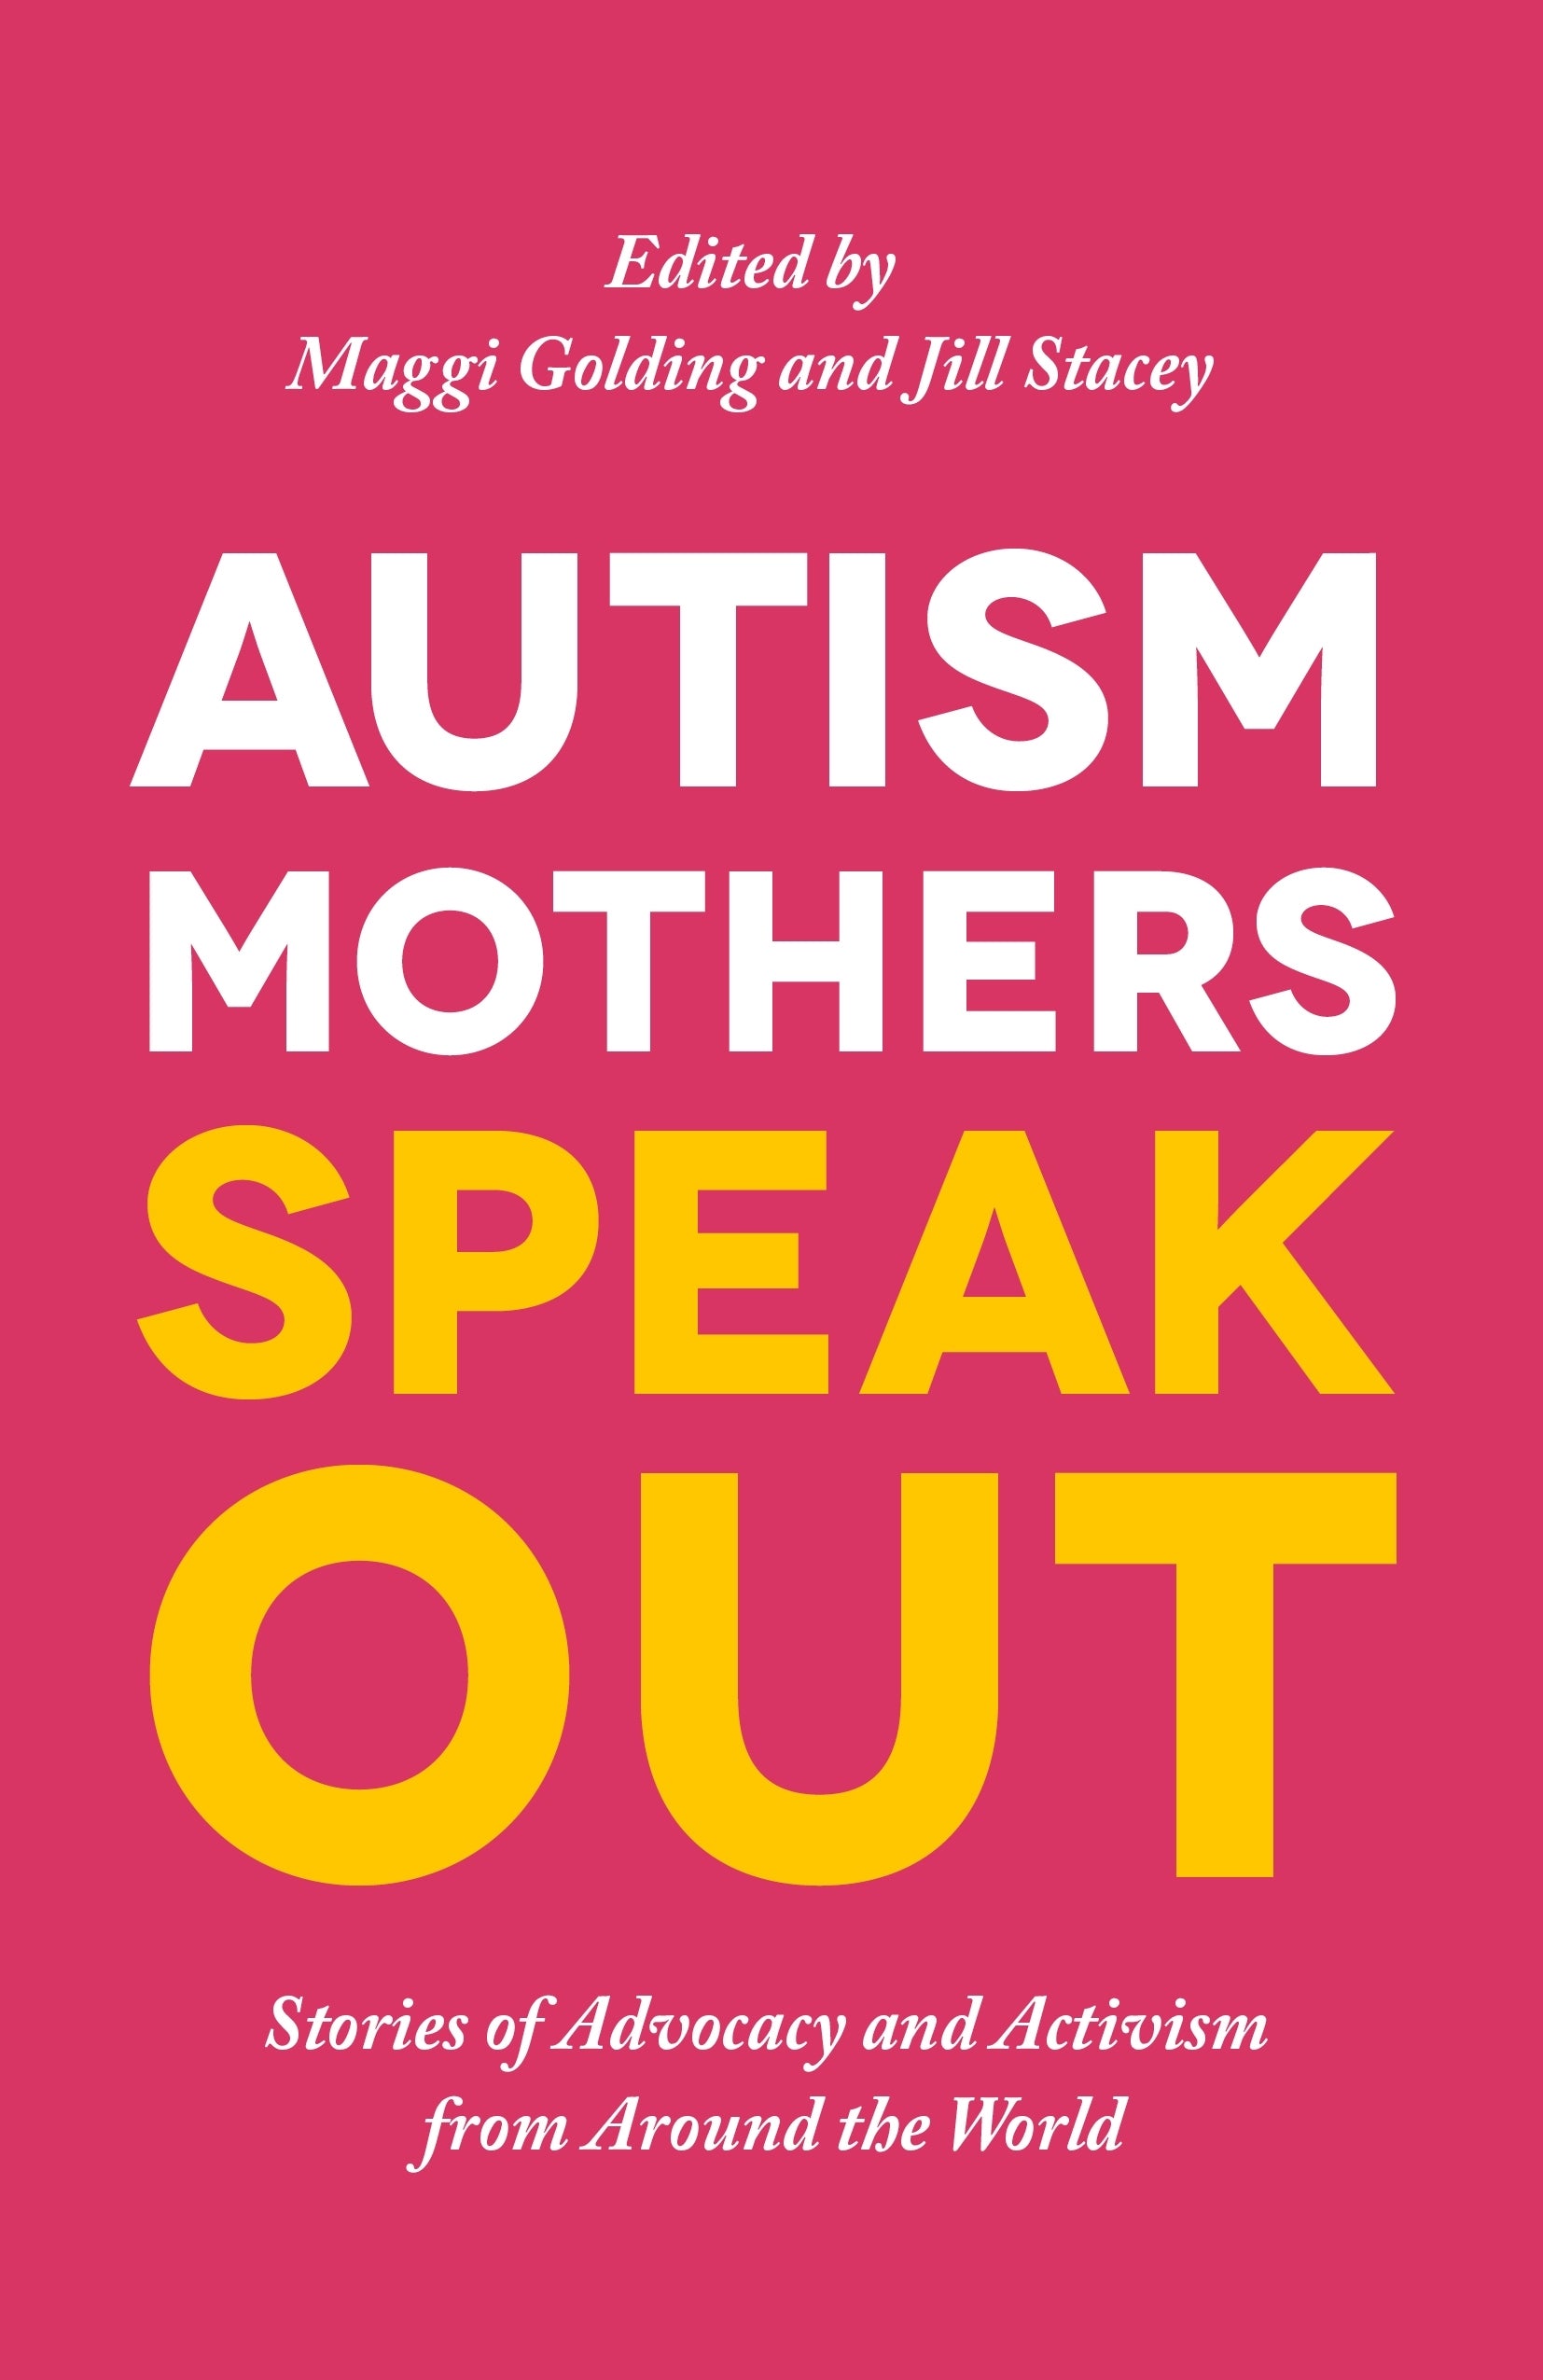 Autism Mothers Speak Out by Margaret Golding, Jill Stacey, No Author Listed